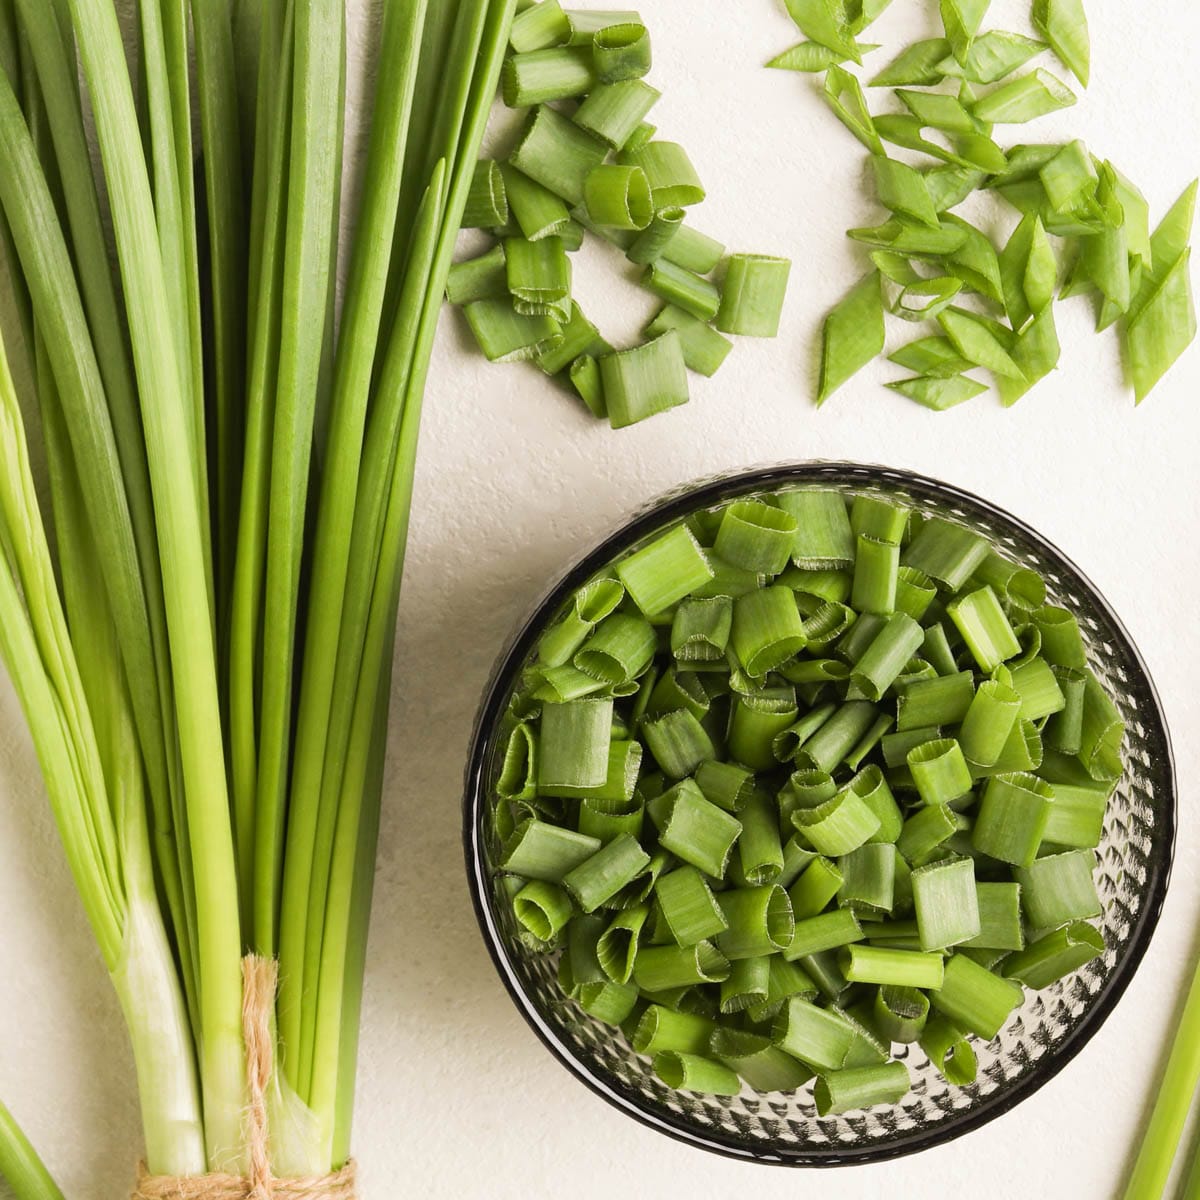 Whole green onions next to bowl of chopped green onions.